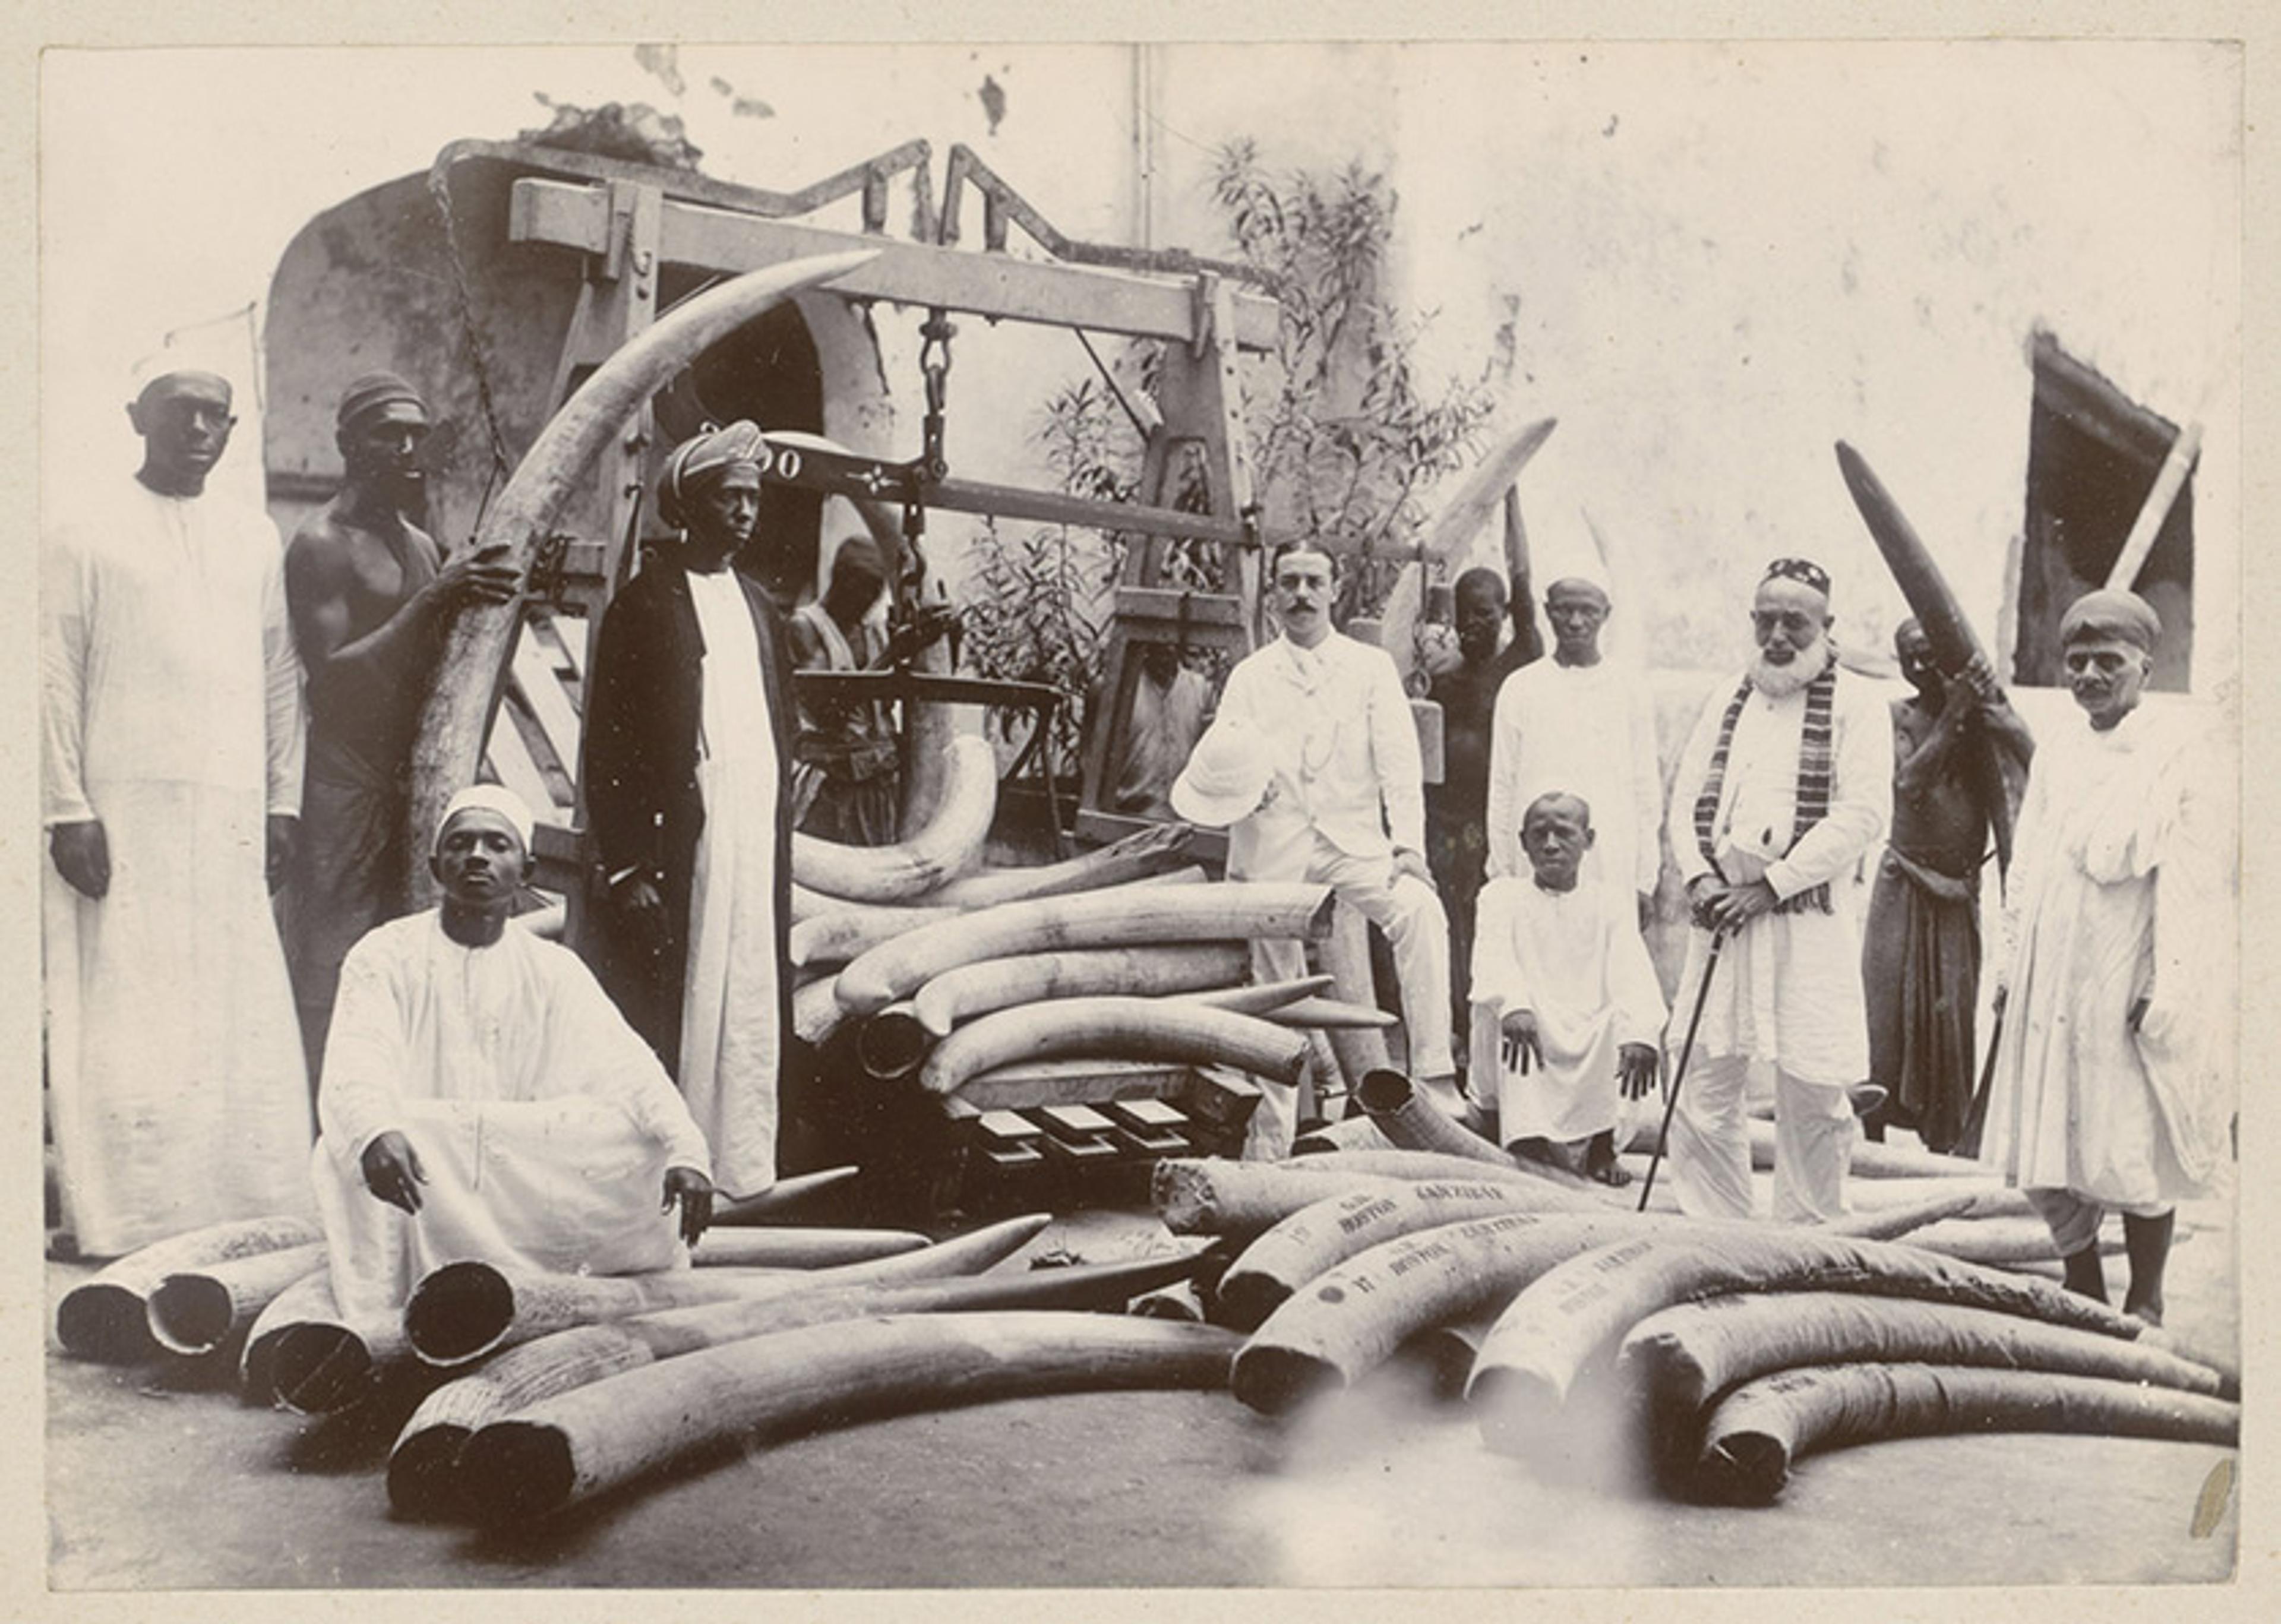 An old photo depicts various traders and people, some possibly enslaved people, beside large quantities of elephant tusks in a courtyard